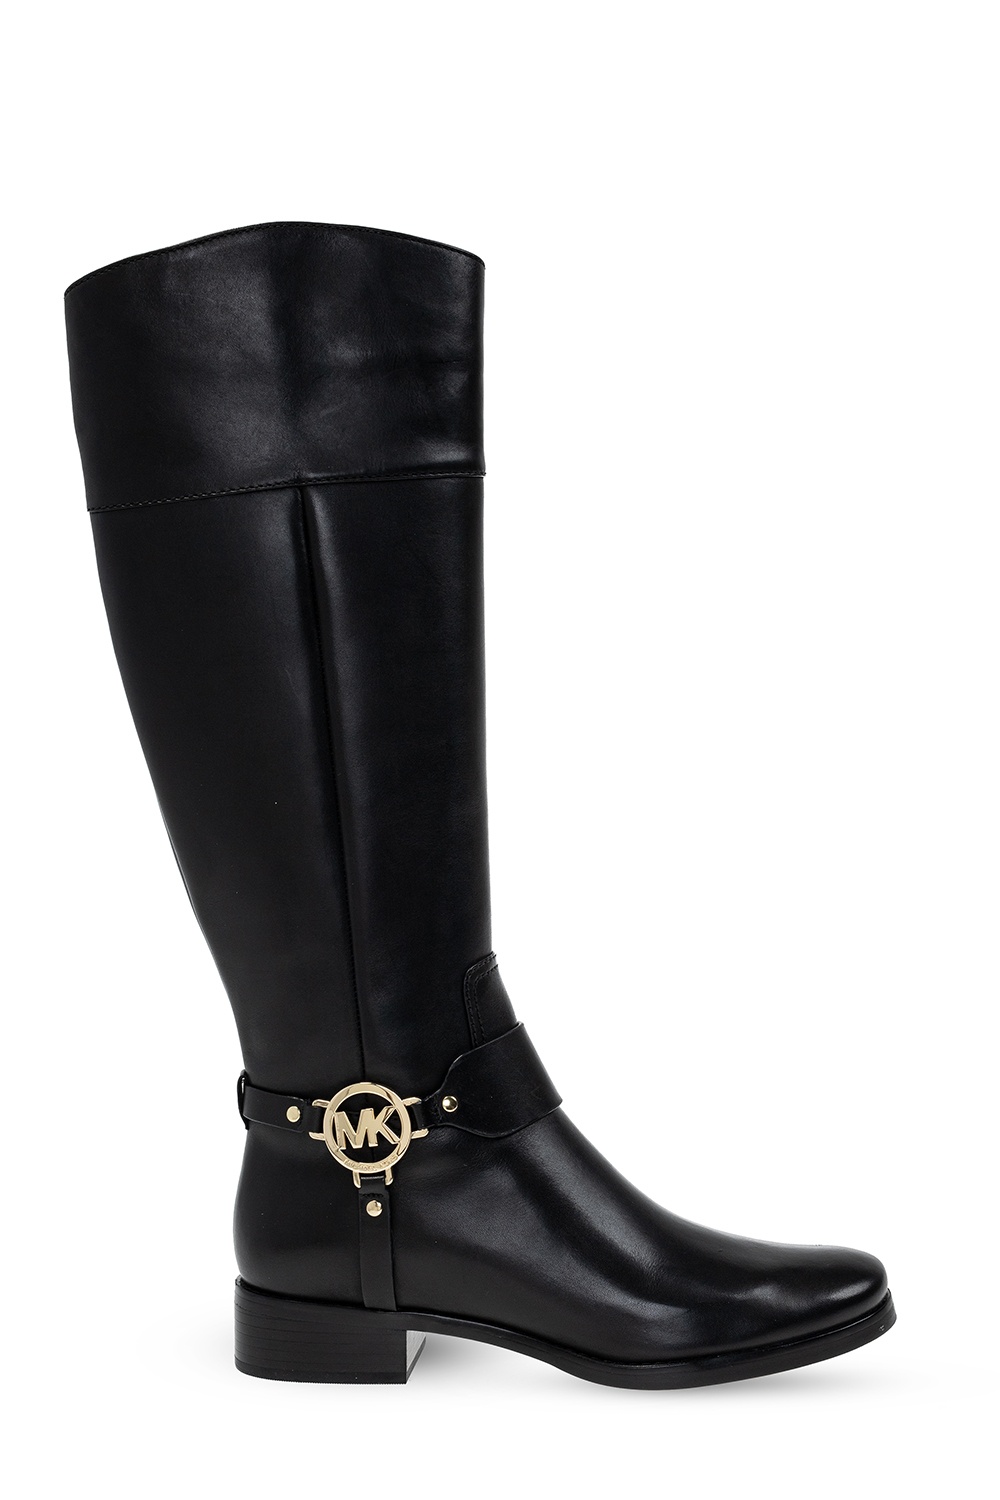 michael kors leather knee high boots